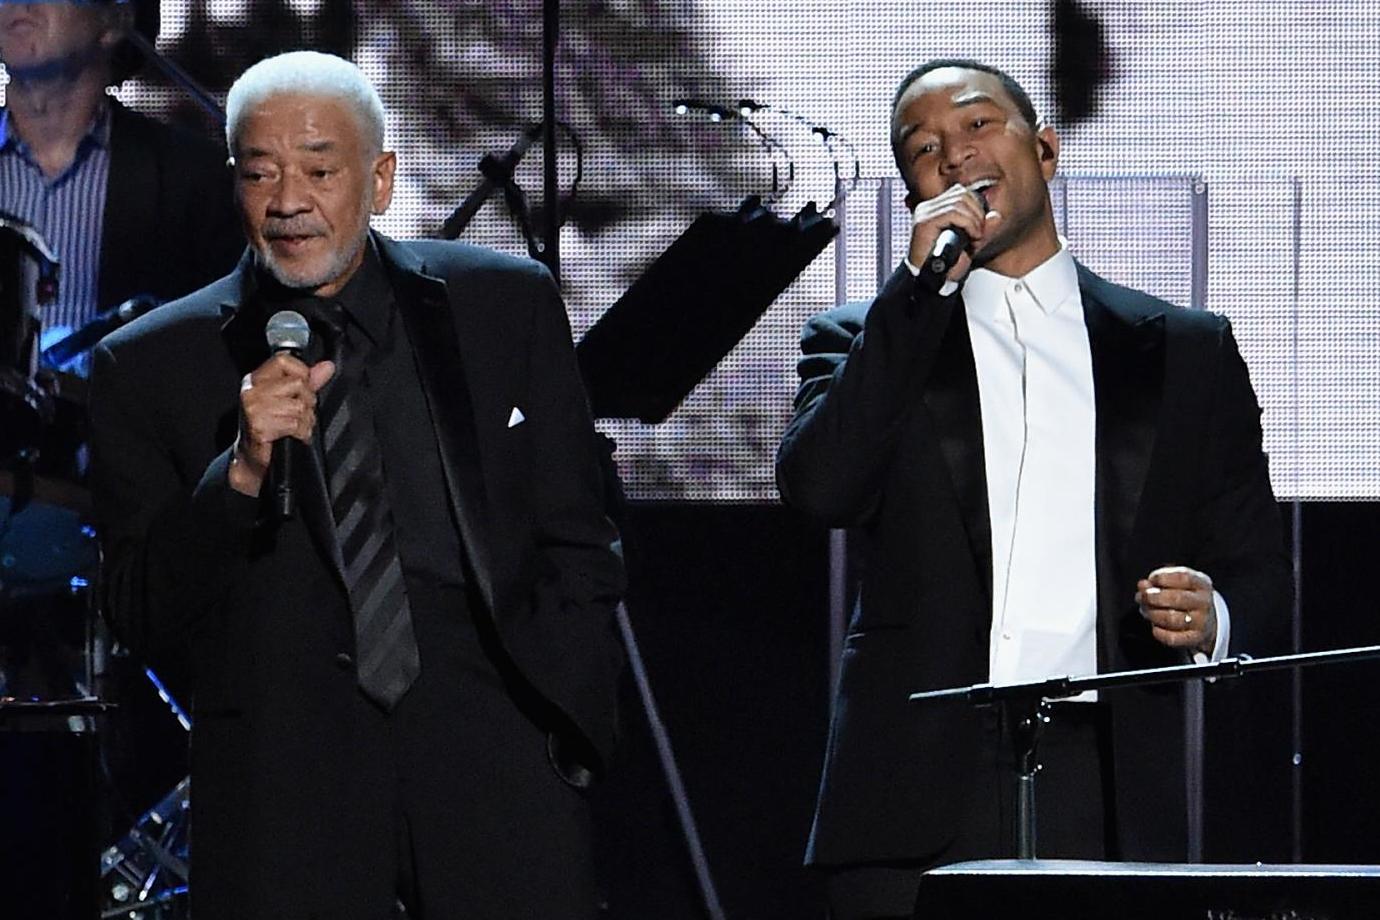 Bill Withers and John Legend perform during the 30th Annual Rock And Roll Hall Of Fame Induction Ceremony on 18 April 2015 in Cleveland, Ohio.